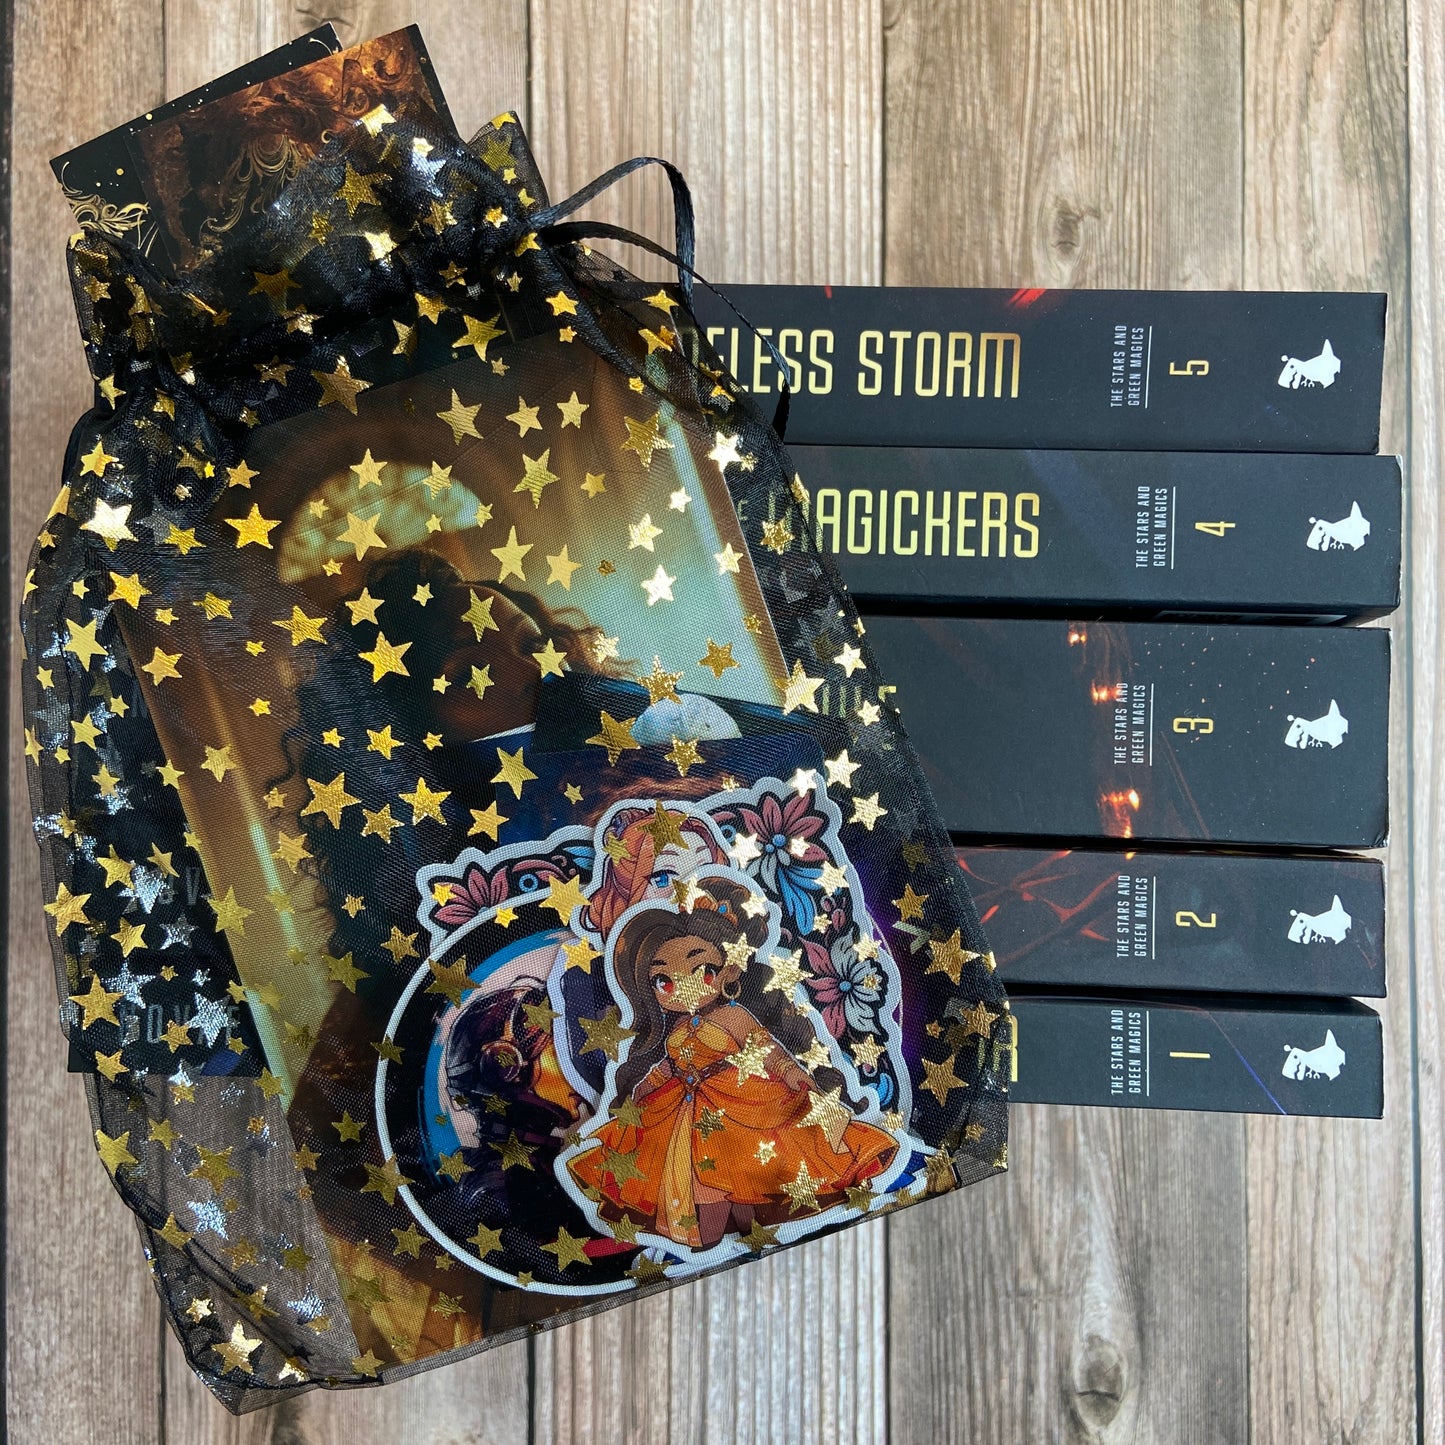 Stack of 5 paperbacks (Books 1-5) from "The Stars and Green Magics" series by Novae Caelum with spines displayed, along with a black, starry mesh gift bag filled with a variety of series-related stickers. This collection is part of the Paperback Deluxe Swag Bundle.